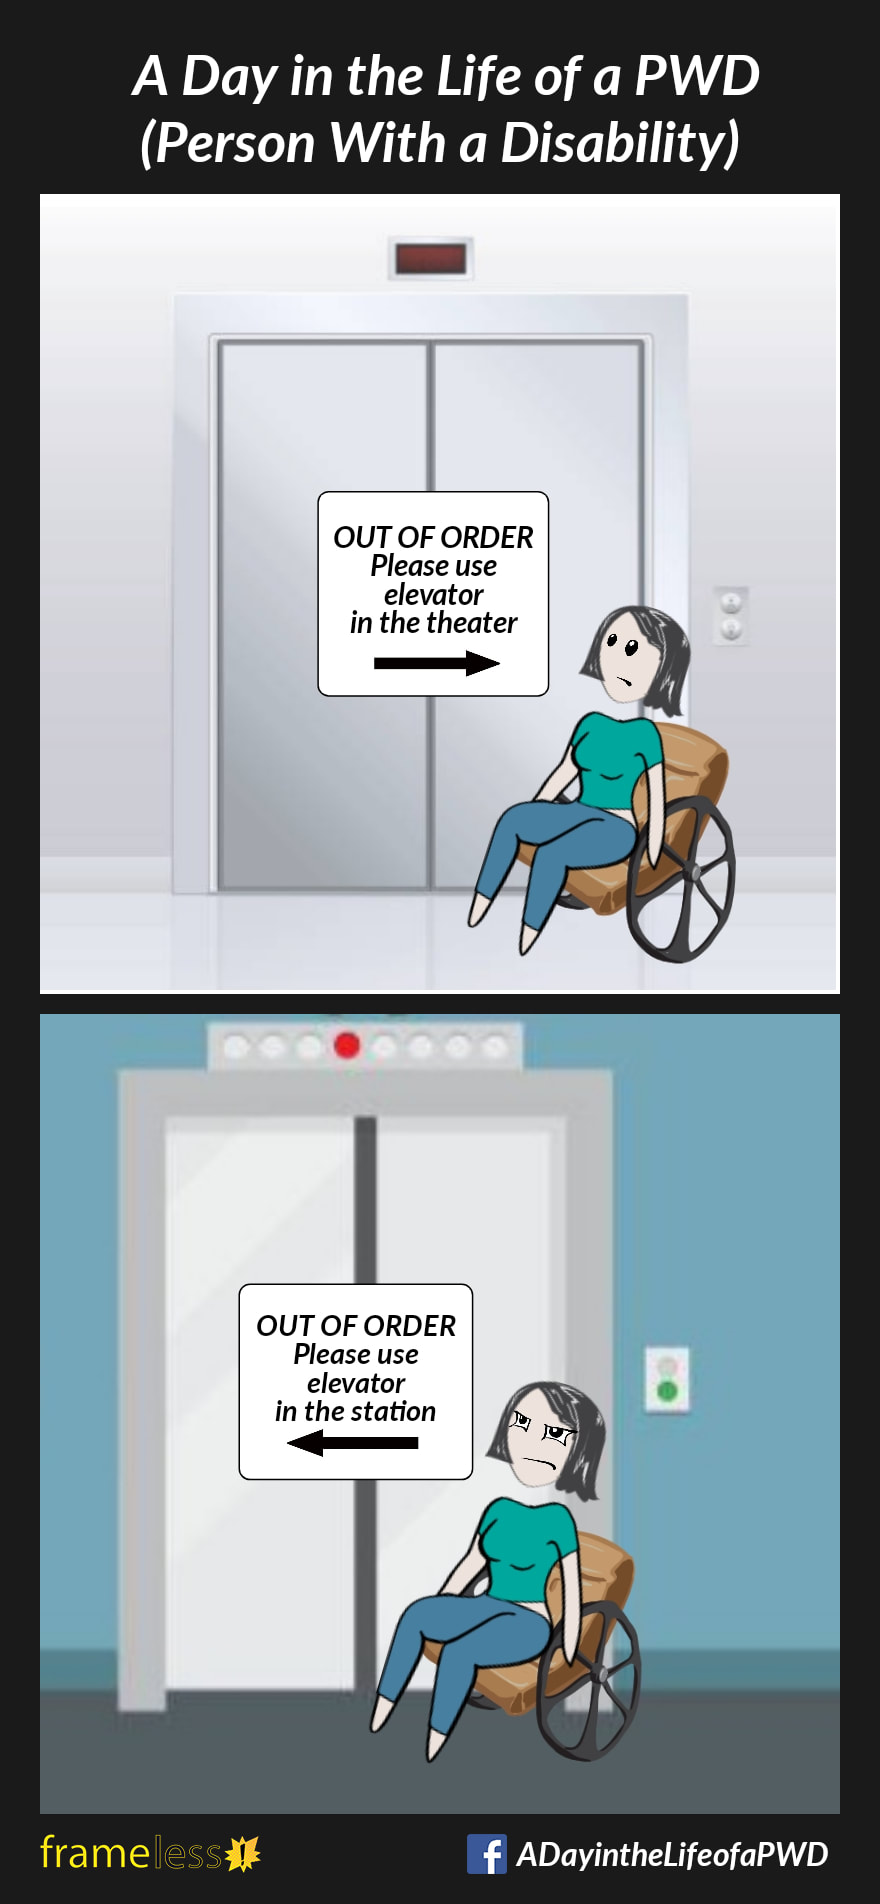 COMIC STRIP 
A Day in the Life of a PWD (Person With a Disability) 

Frame 1:
A woman in a wheelchair is at an elevator in a train station. 
A sign on the elevator reads: 
